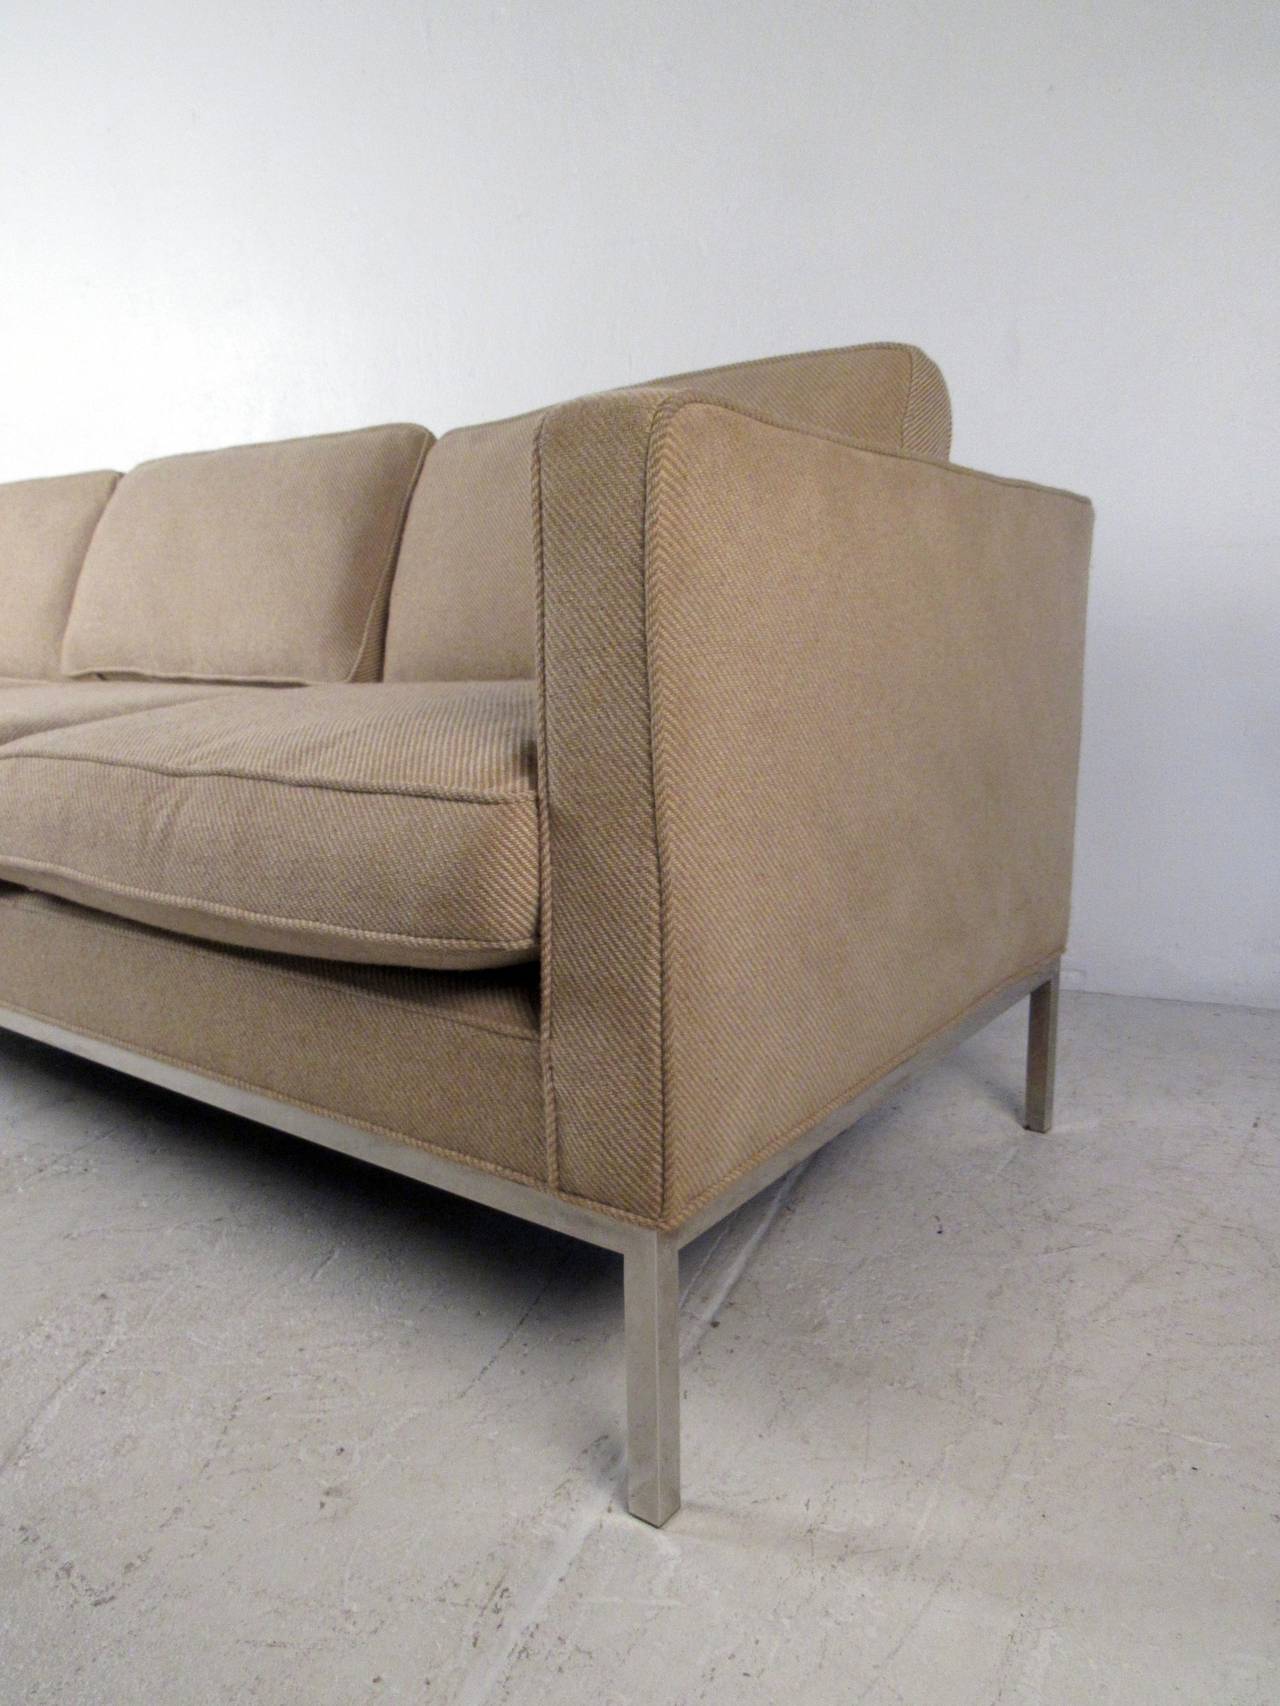 20th Century Mid-Century Modern Sofa in the Style of Knoll